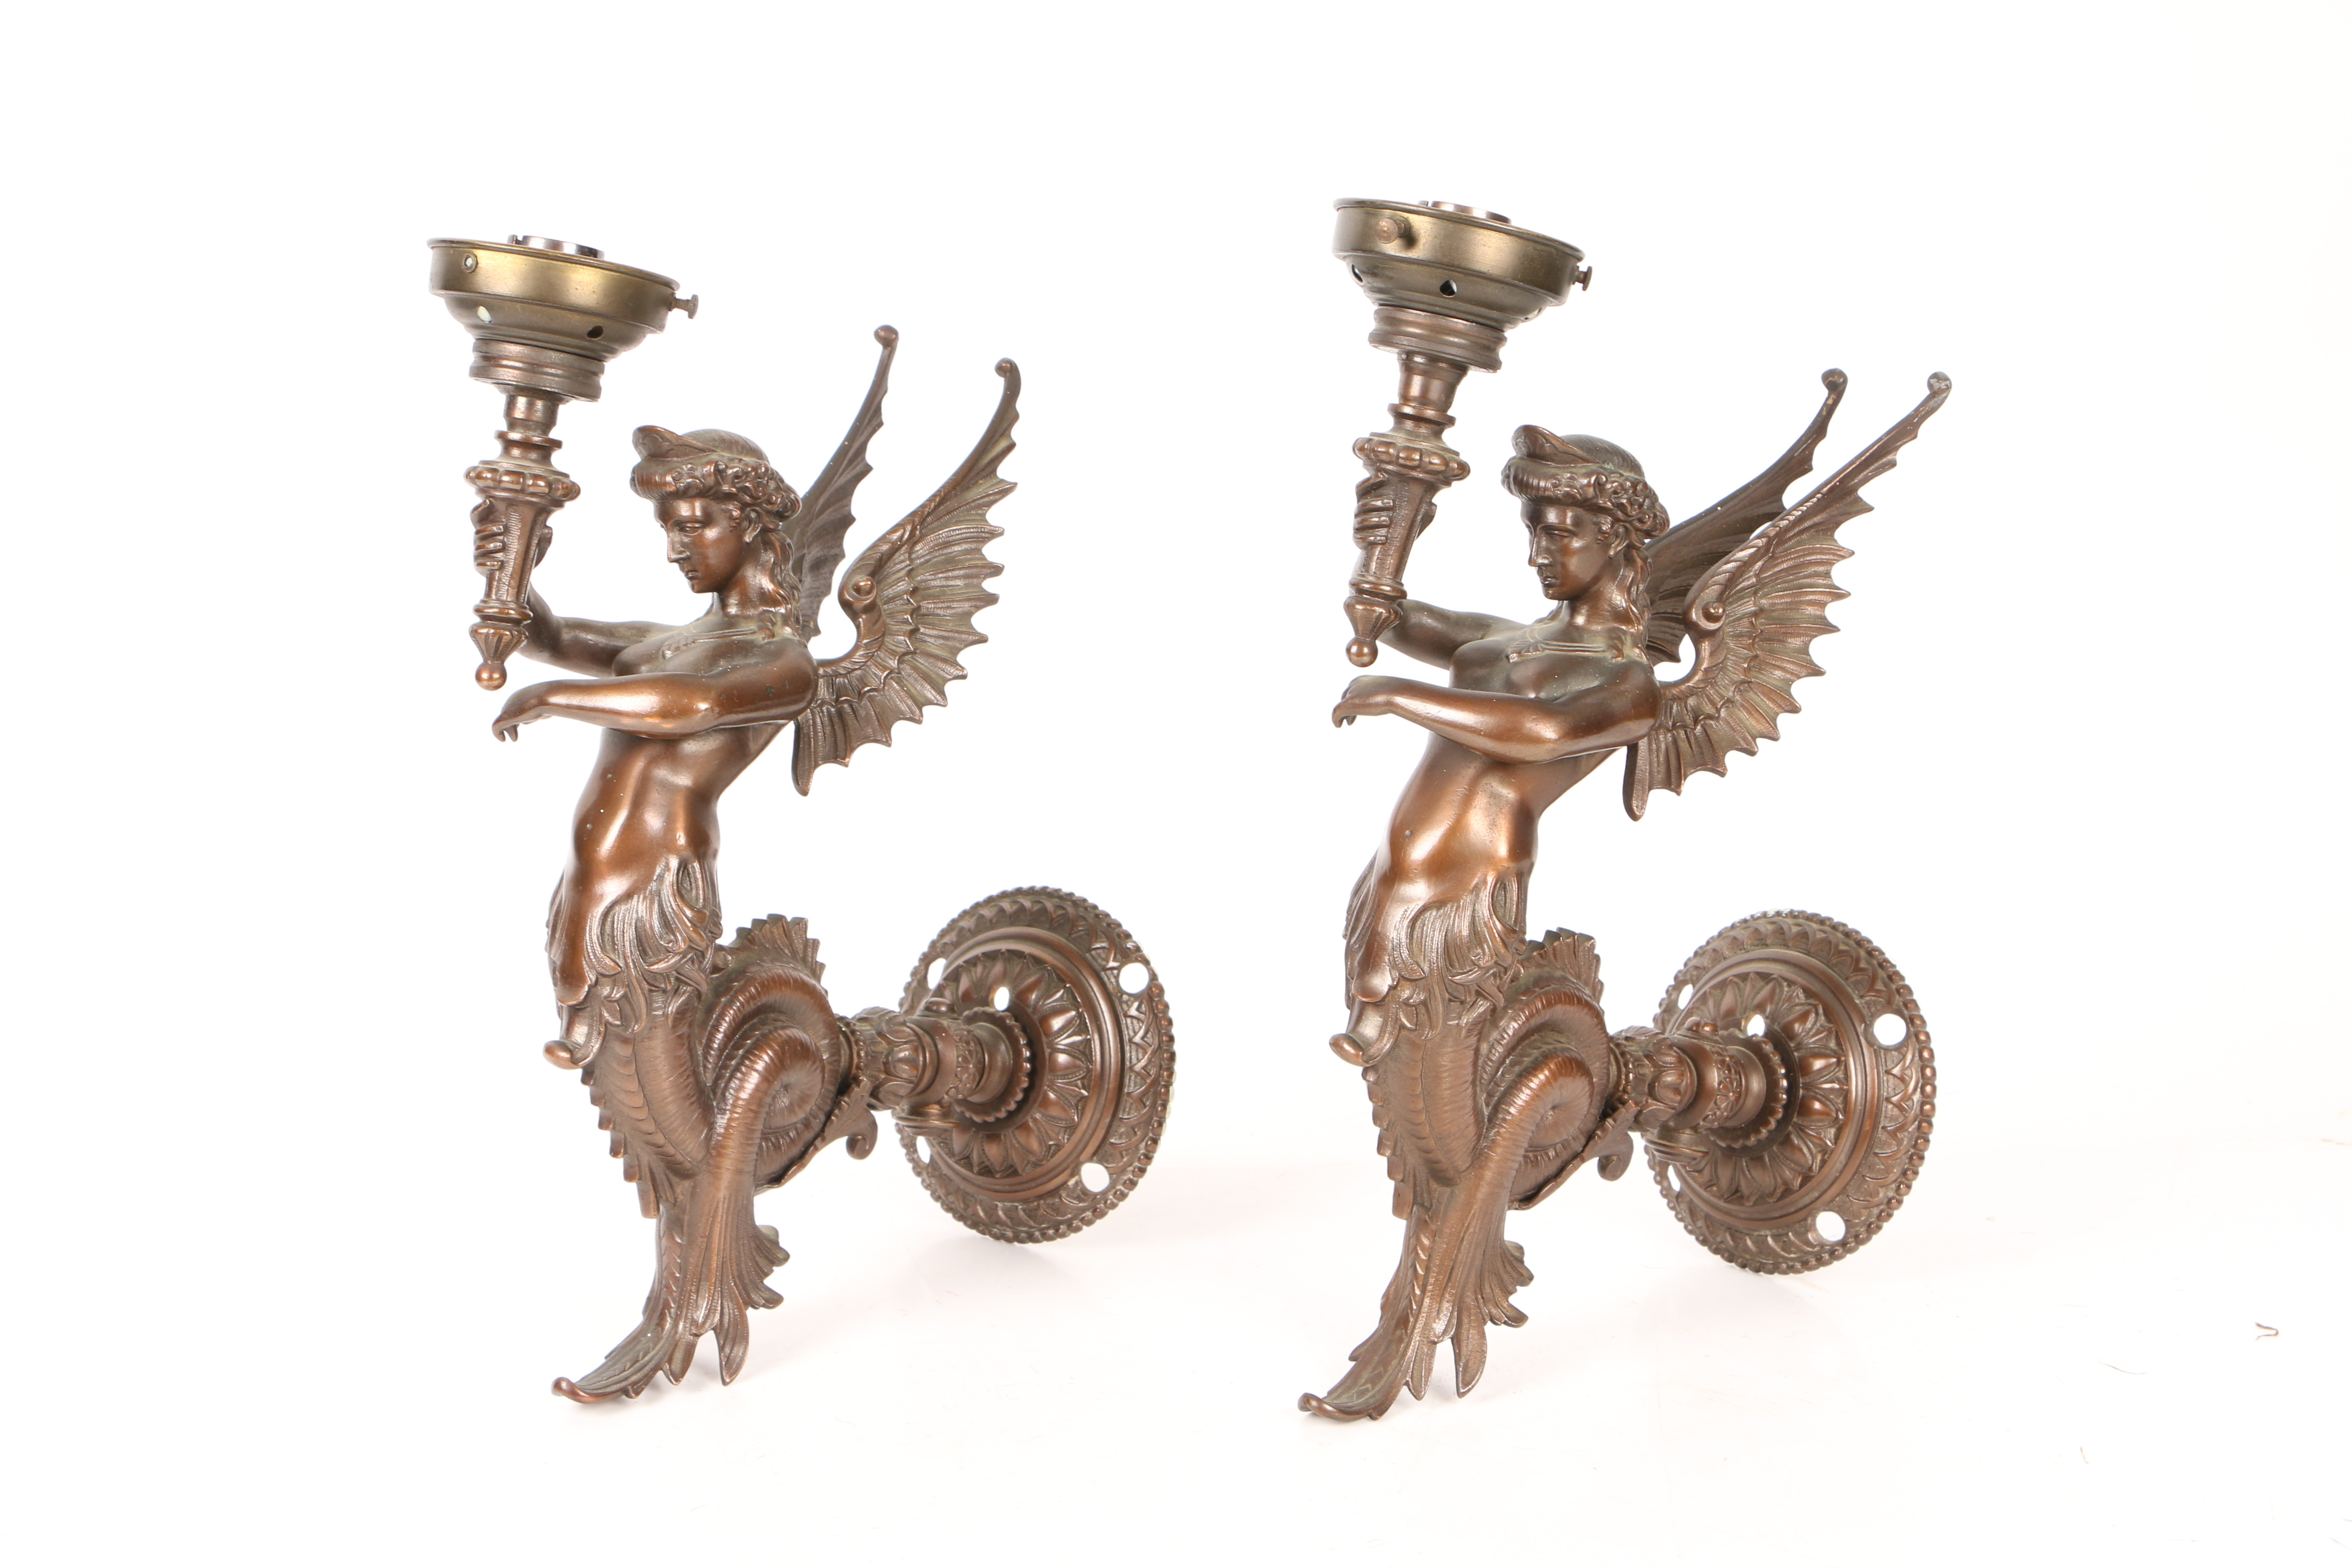 A PAIR OF BRONZE PATINATED WALL SCONCES IN THE FORM OF SIRENS. - Image 6 of 6